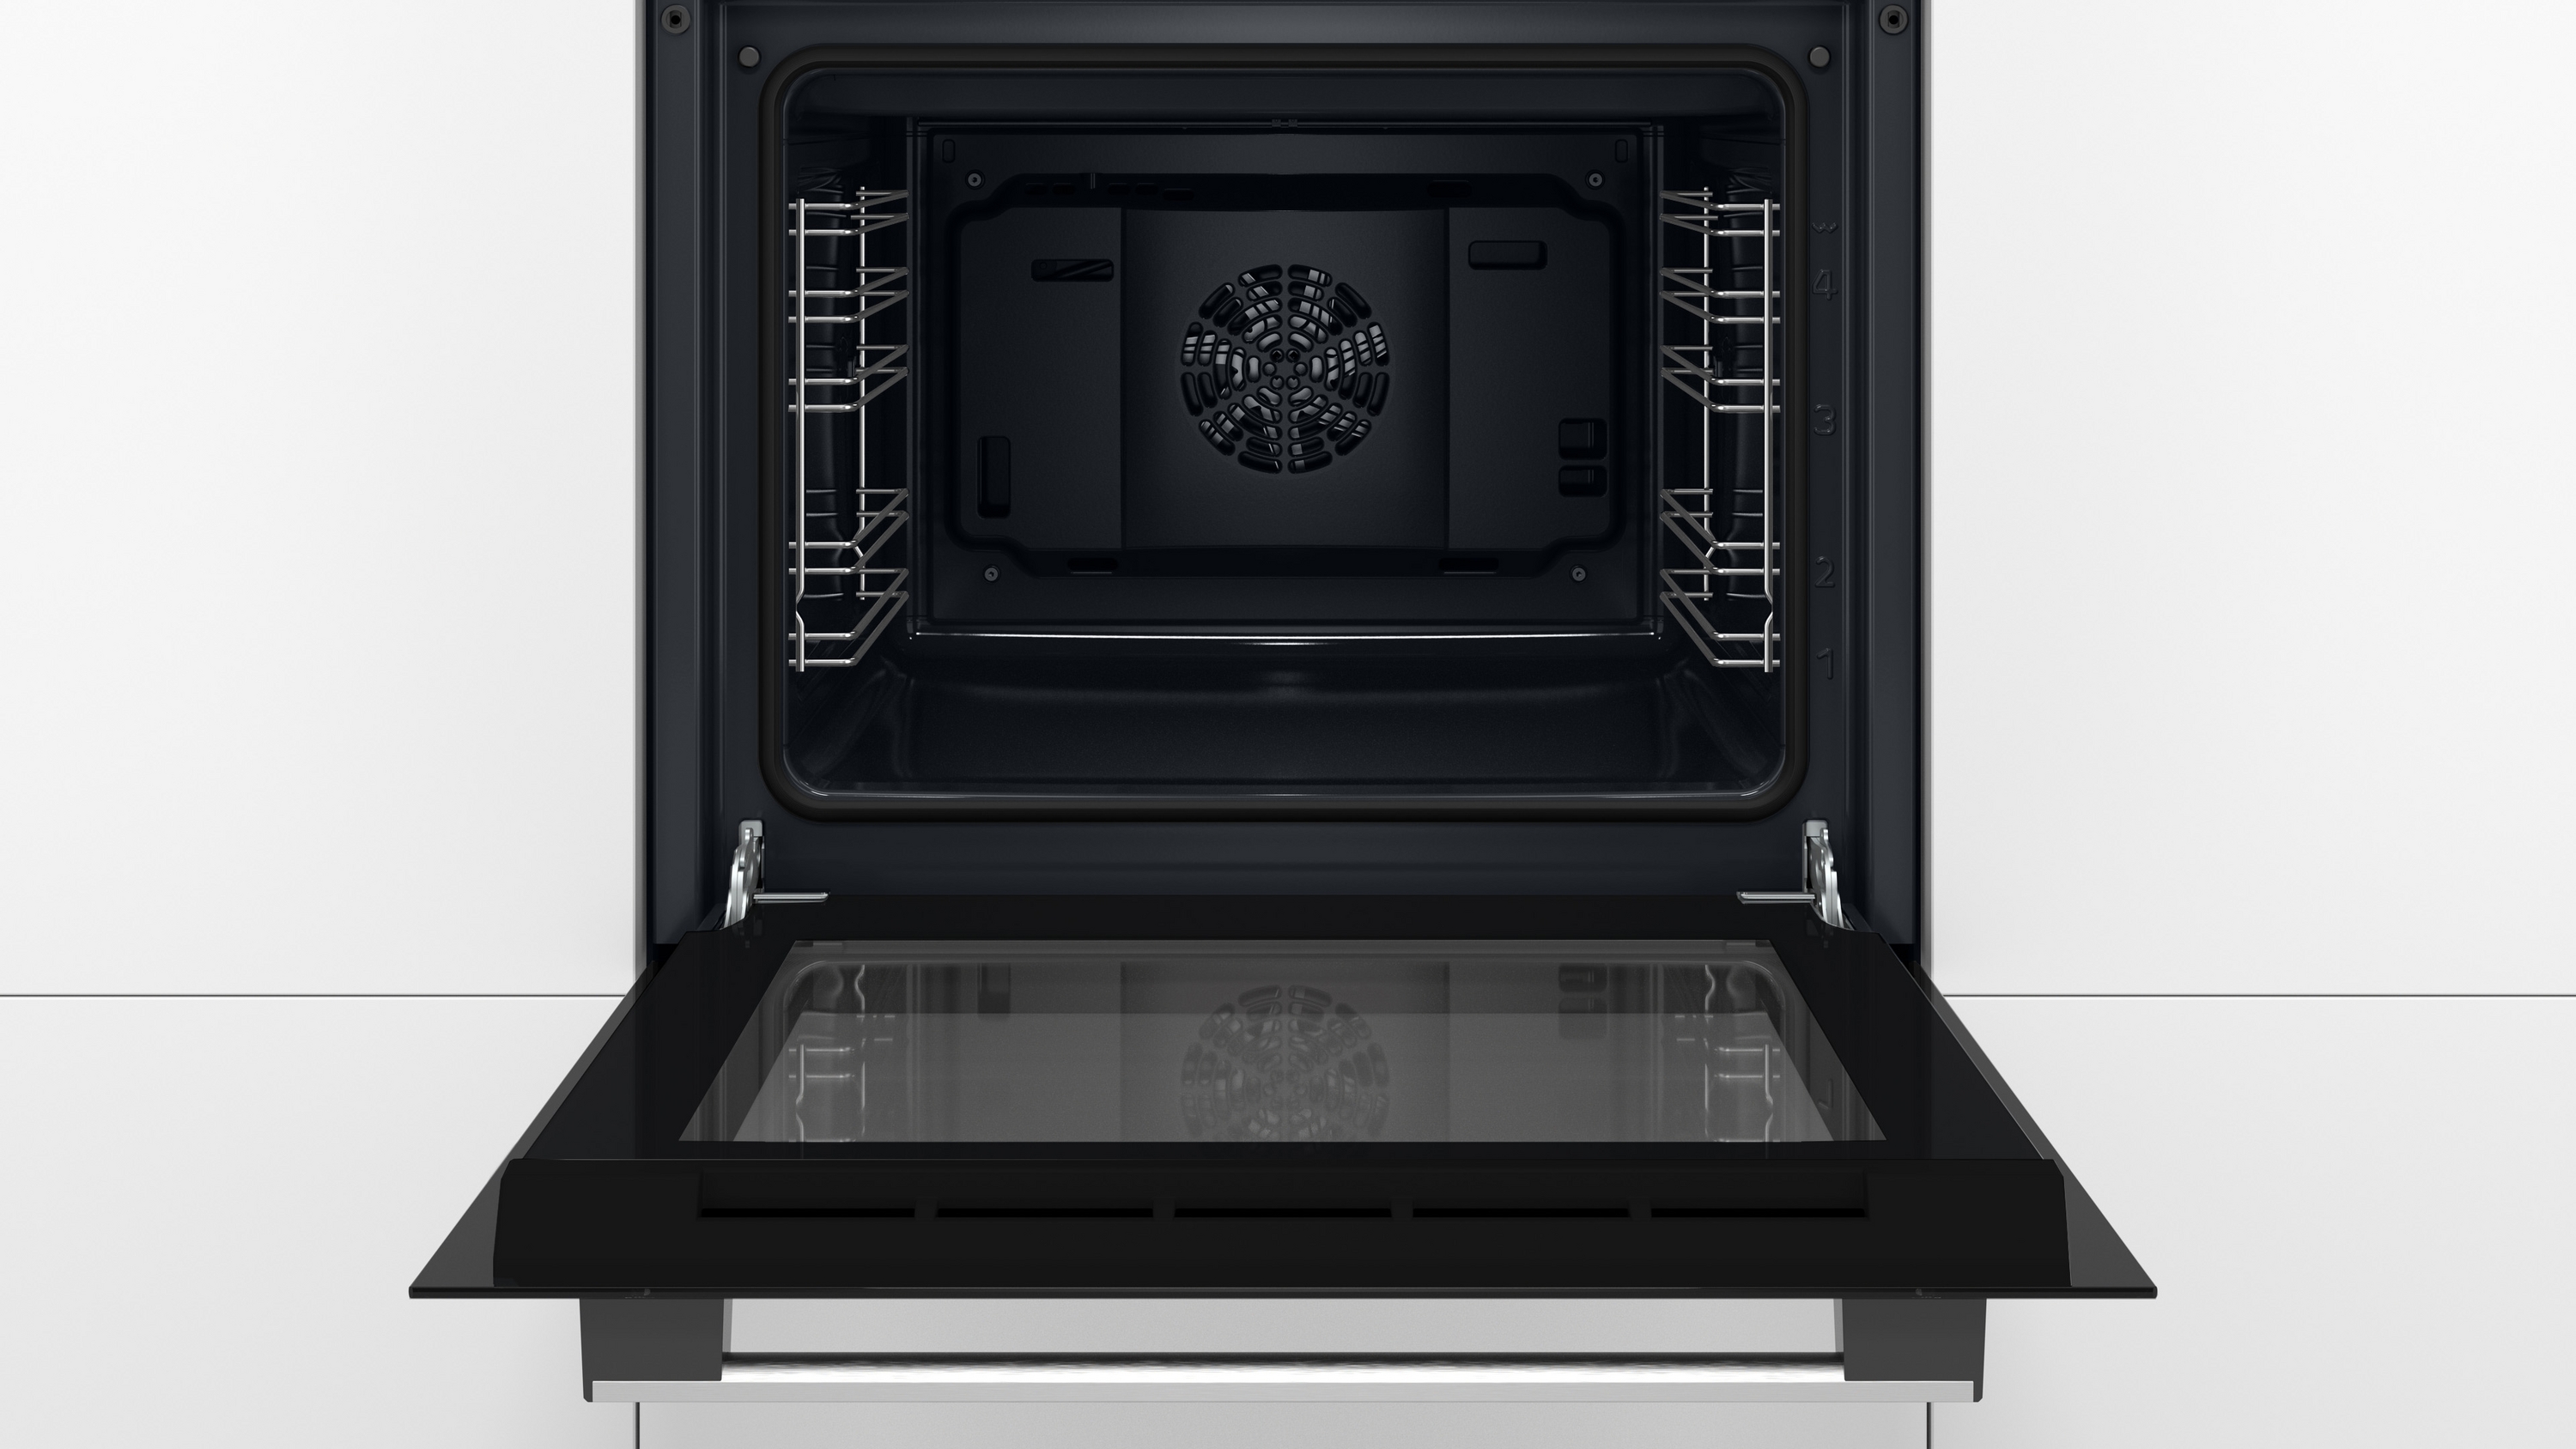 Series 2, Built-in oven, 60 x 60 cm, Stainless steel, HBF114BS1